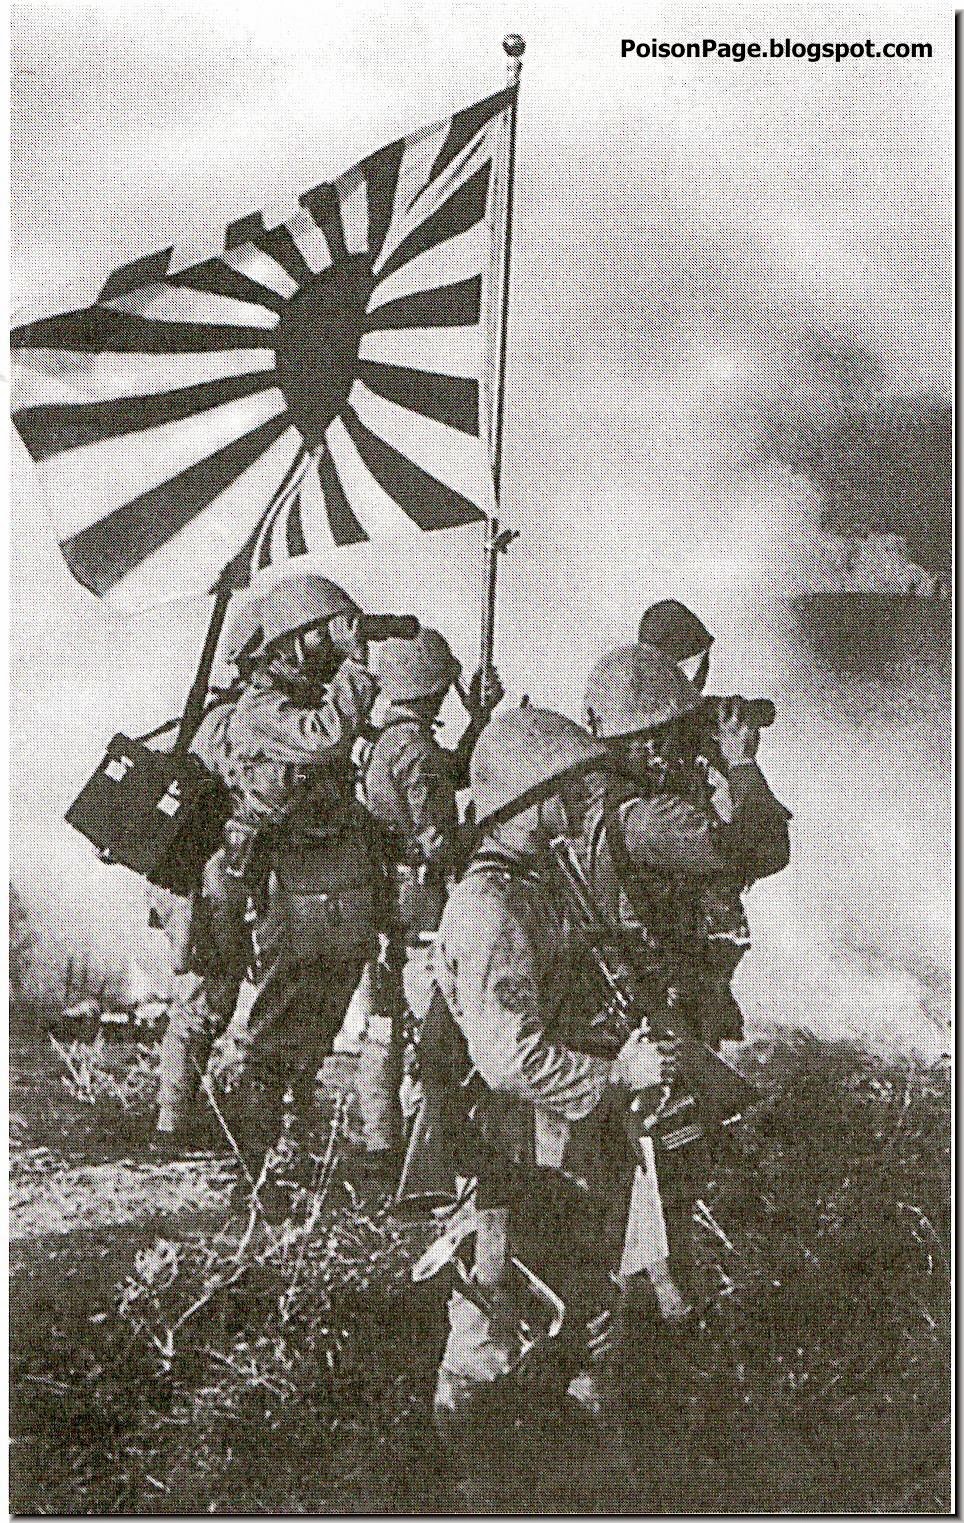 Japanese Soldiers During WW2: In Pictures.